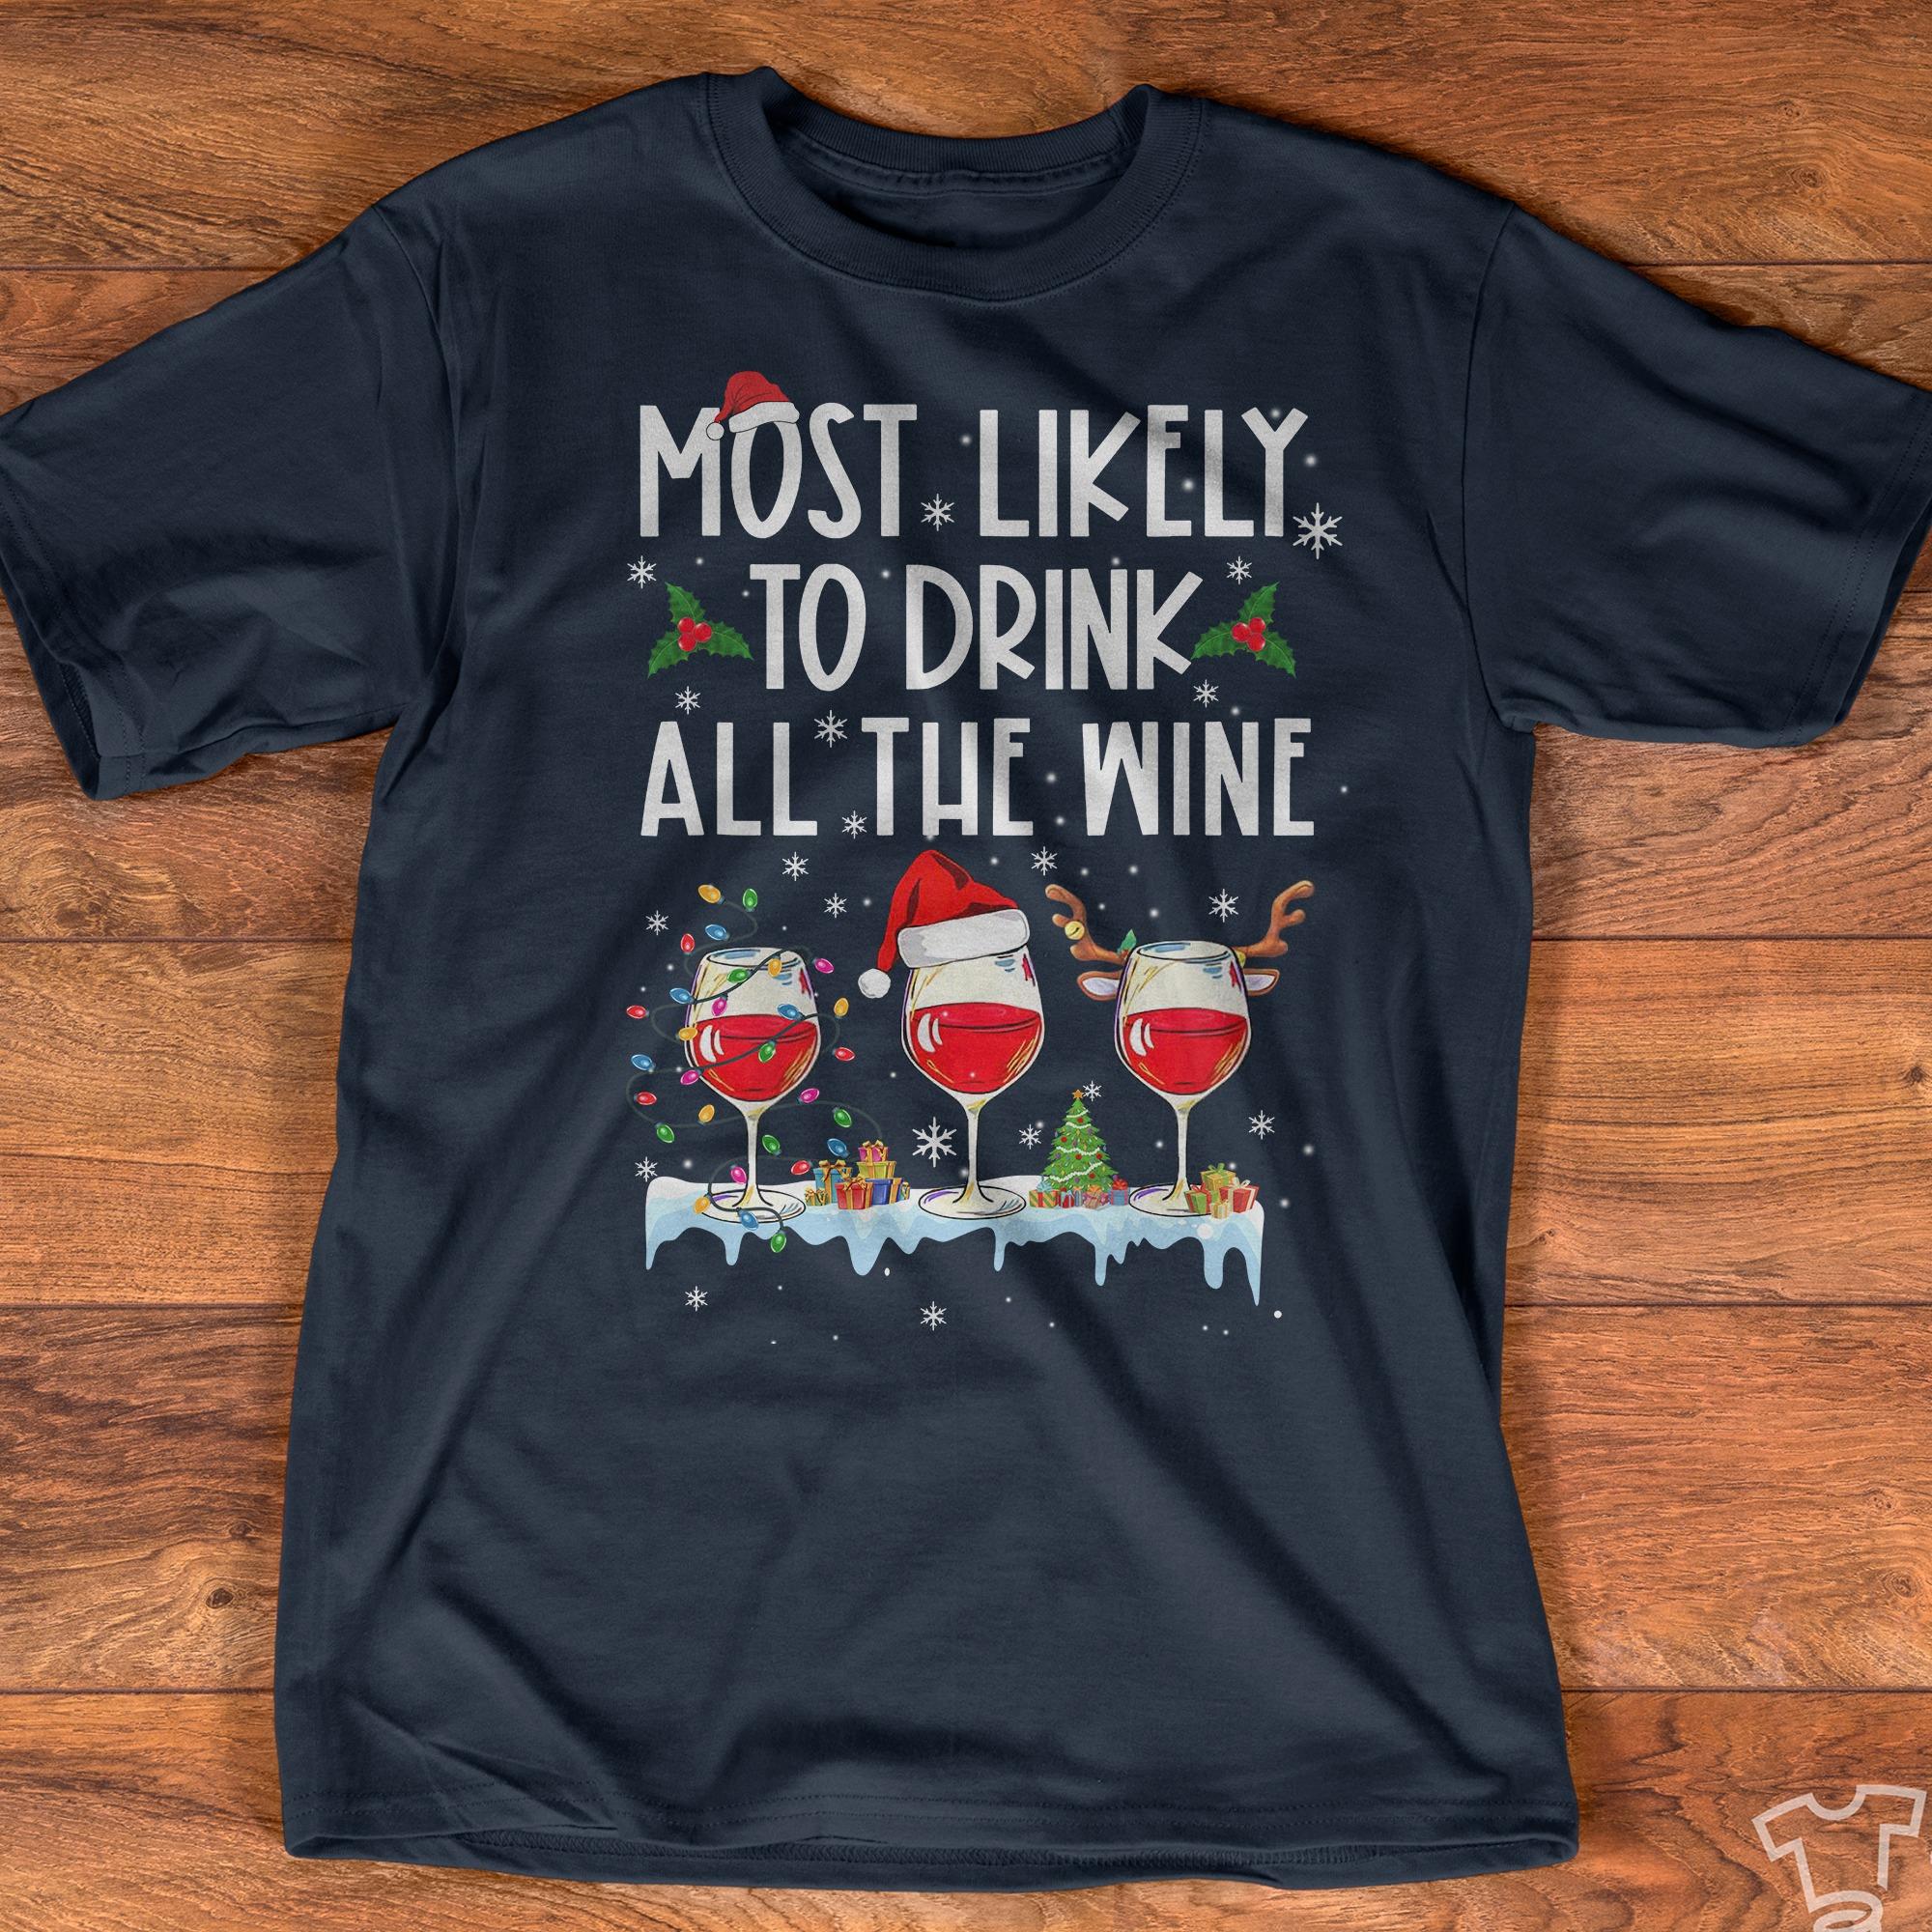 Most likely to drink all the wine - Christmas Xmas Drink Wine